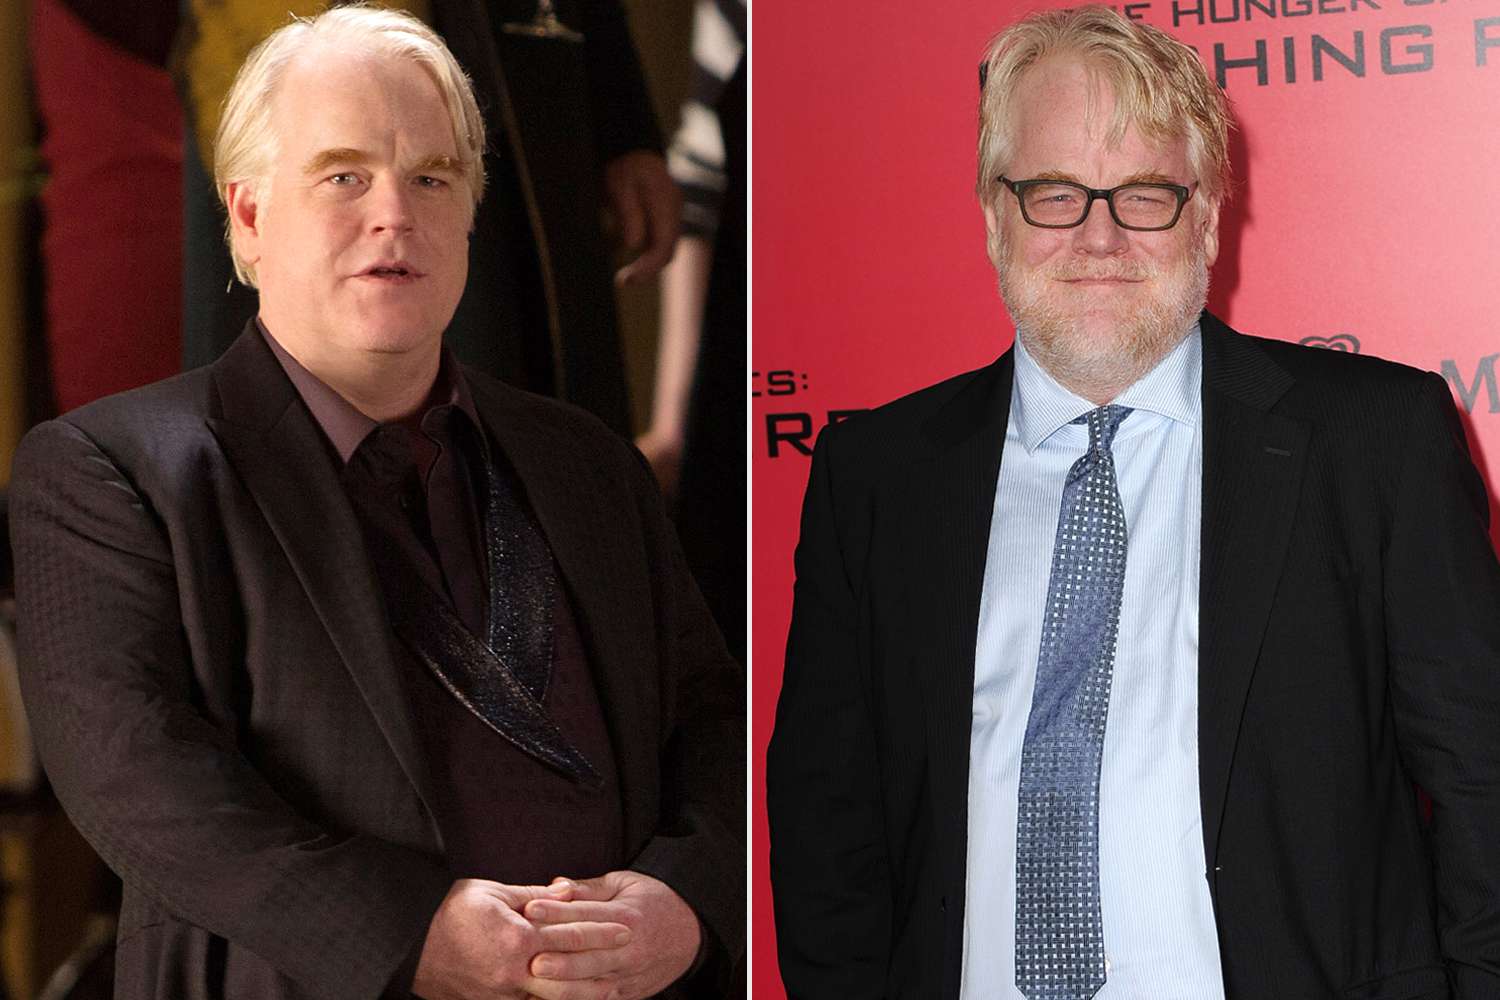 Philip Seymour Hoffman, Hunger Games Where Are They Now?